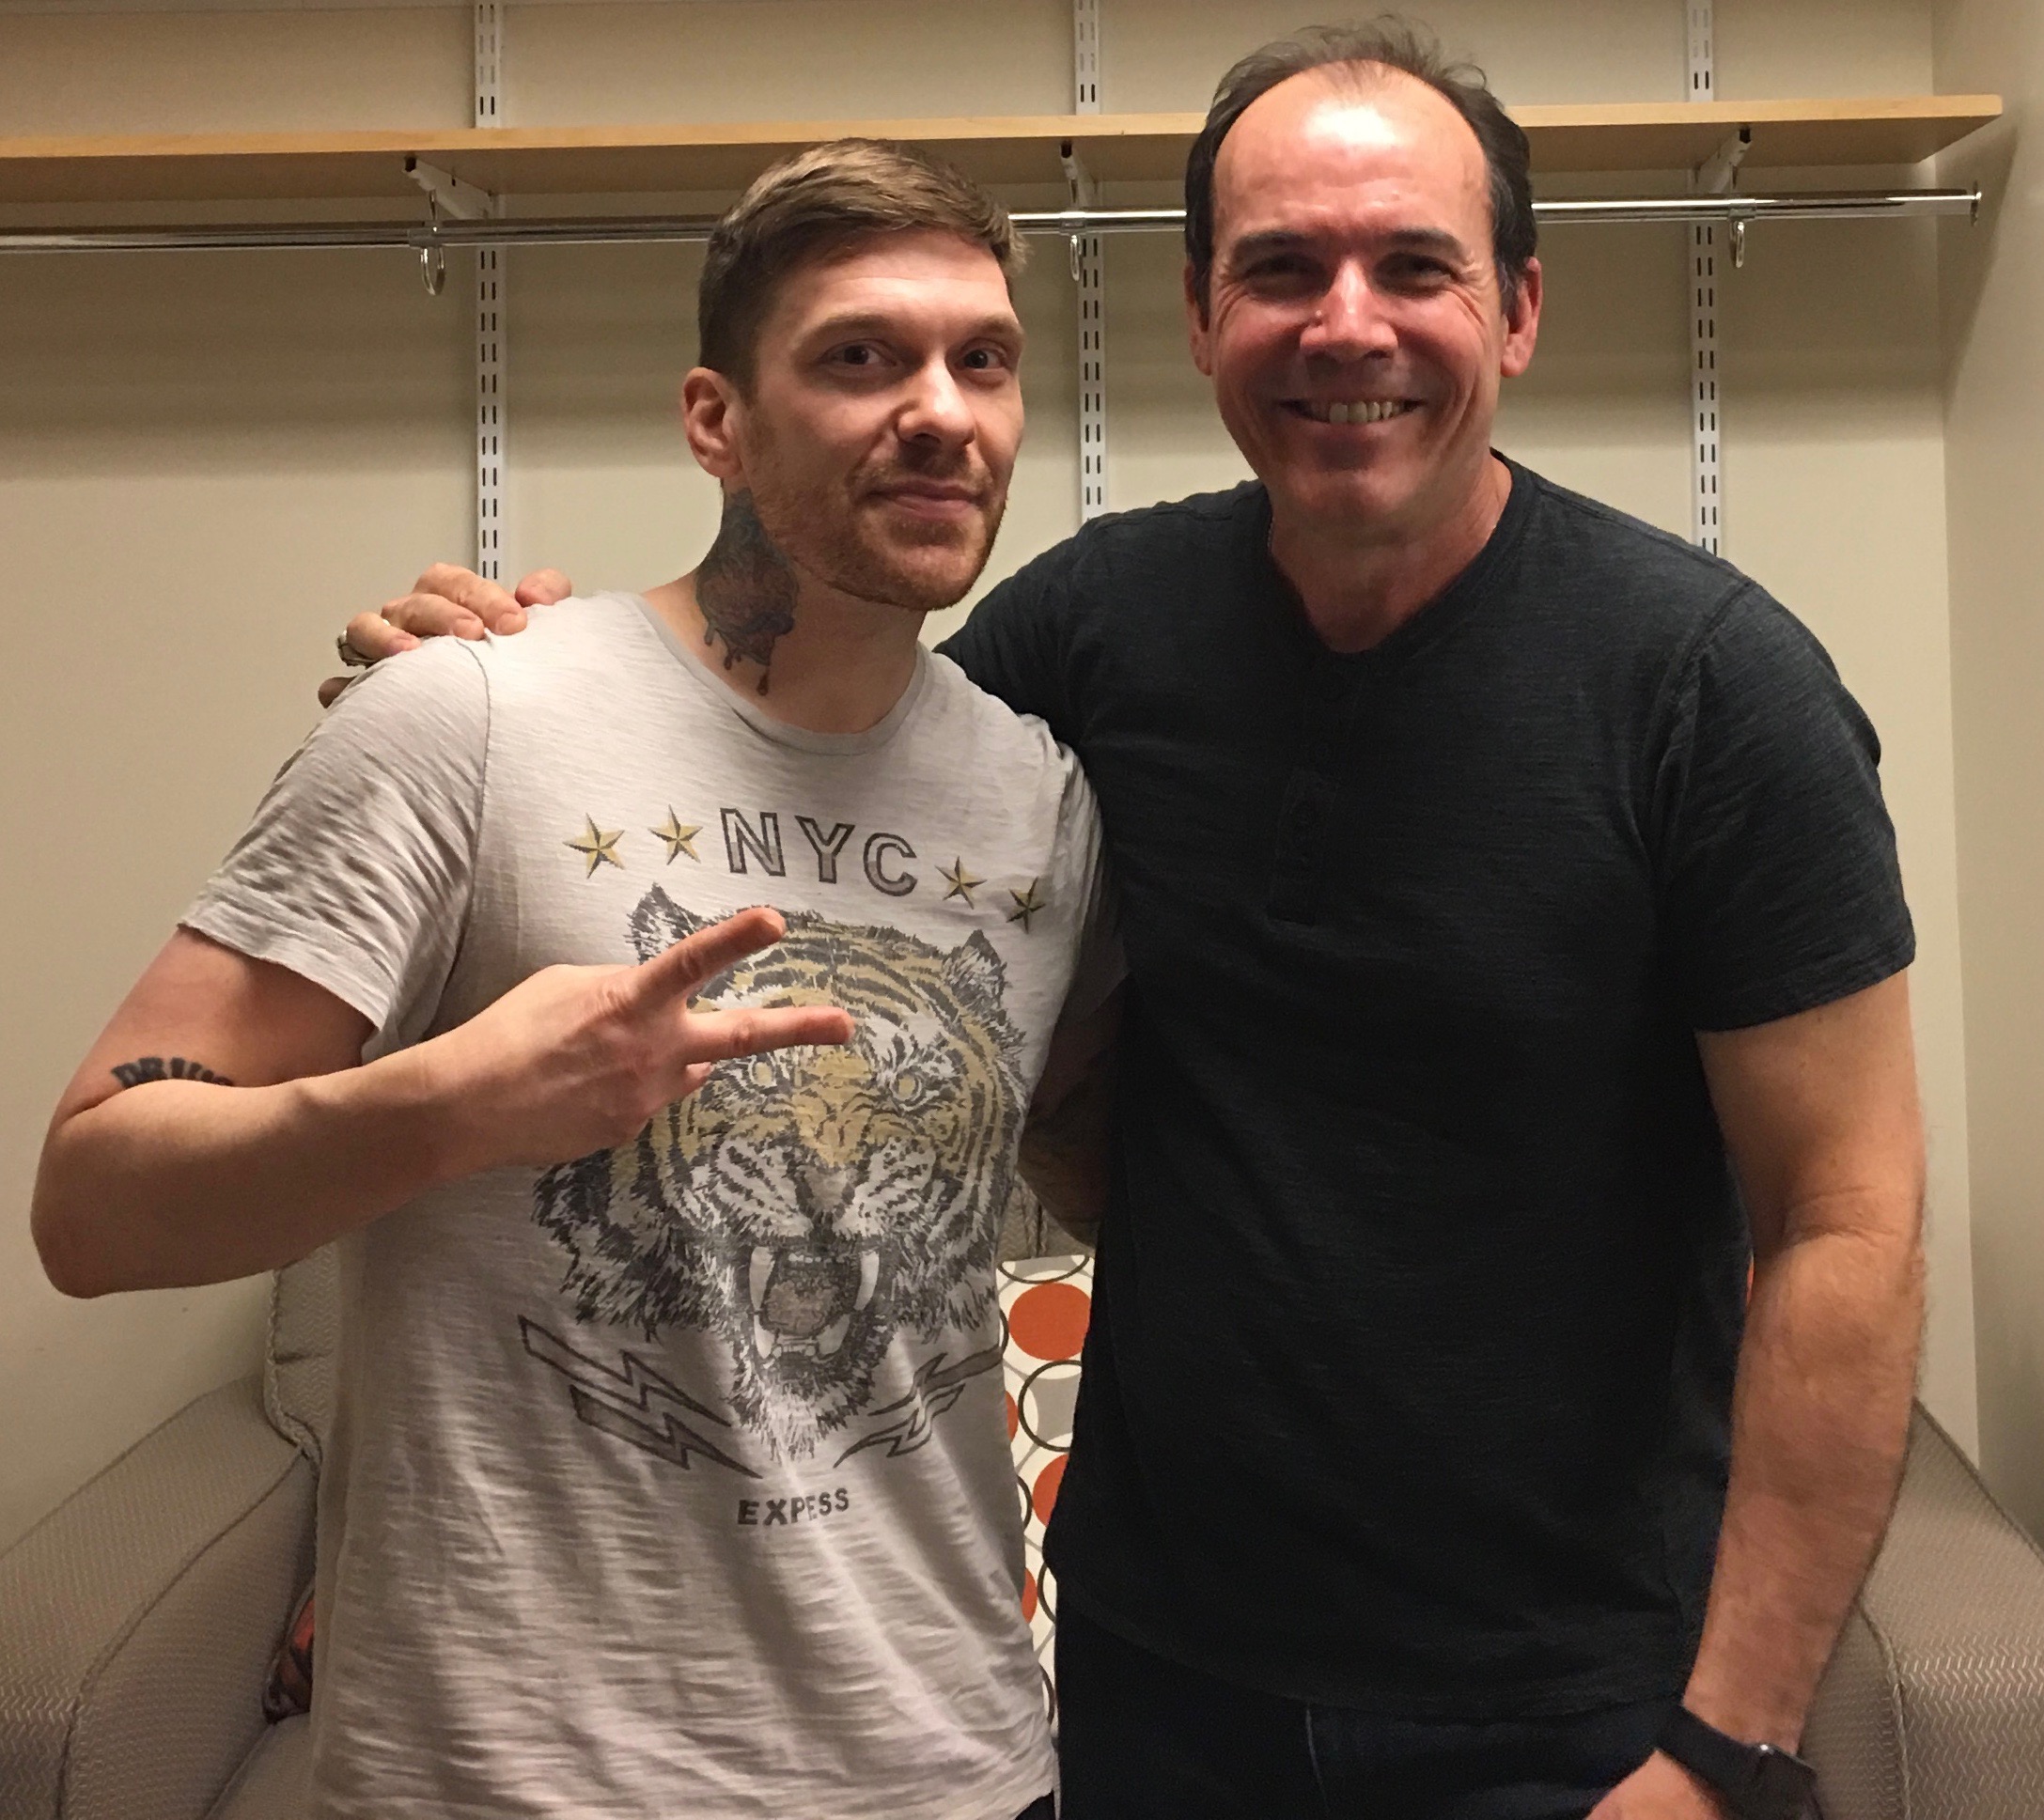 Brent Smith from Shinedown interview with LA Lloyd